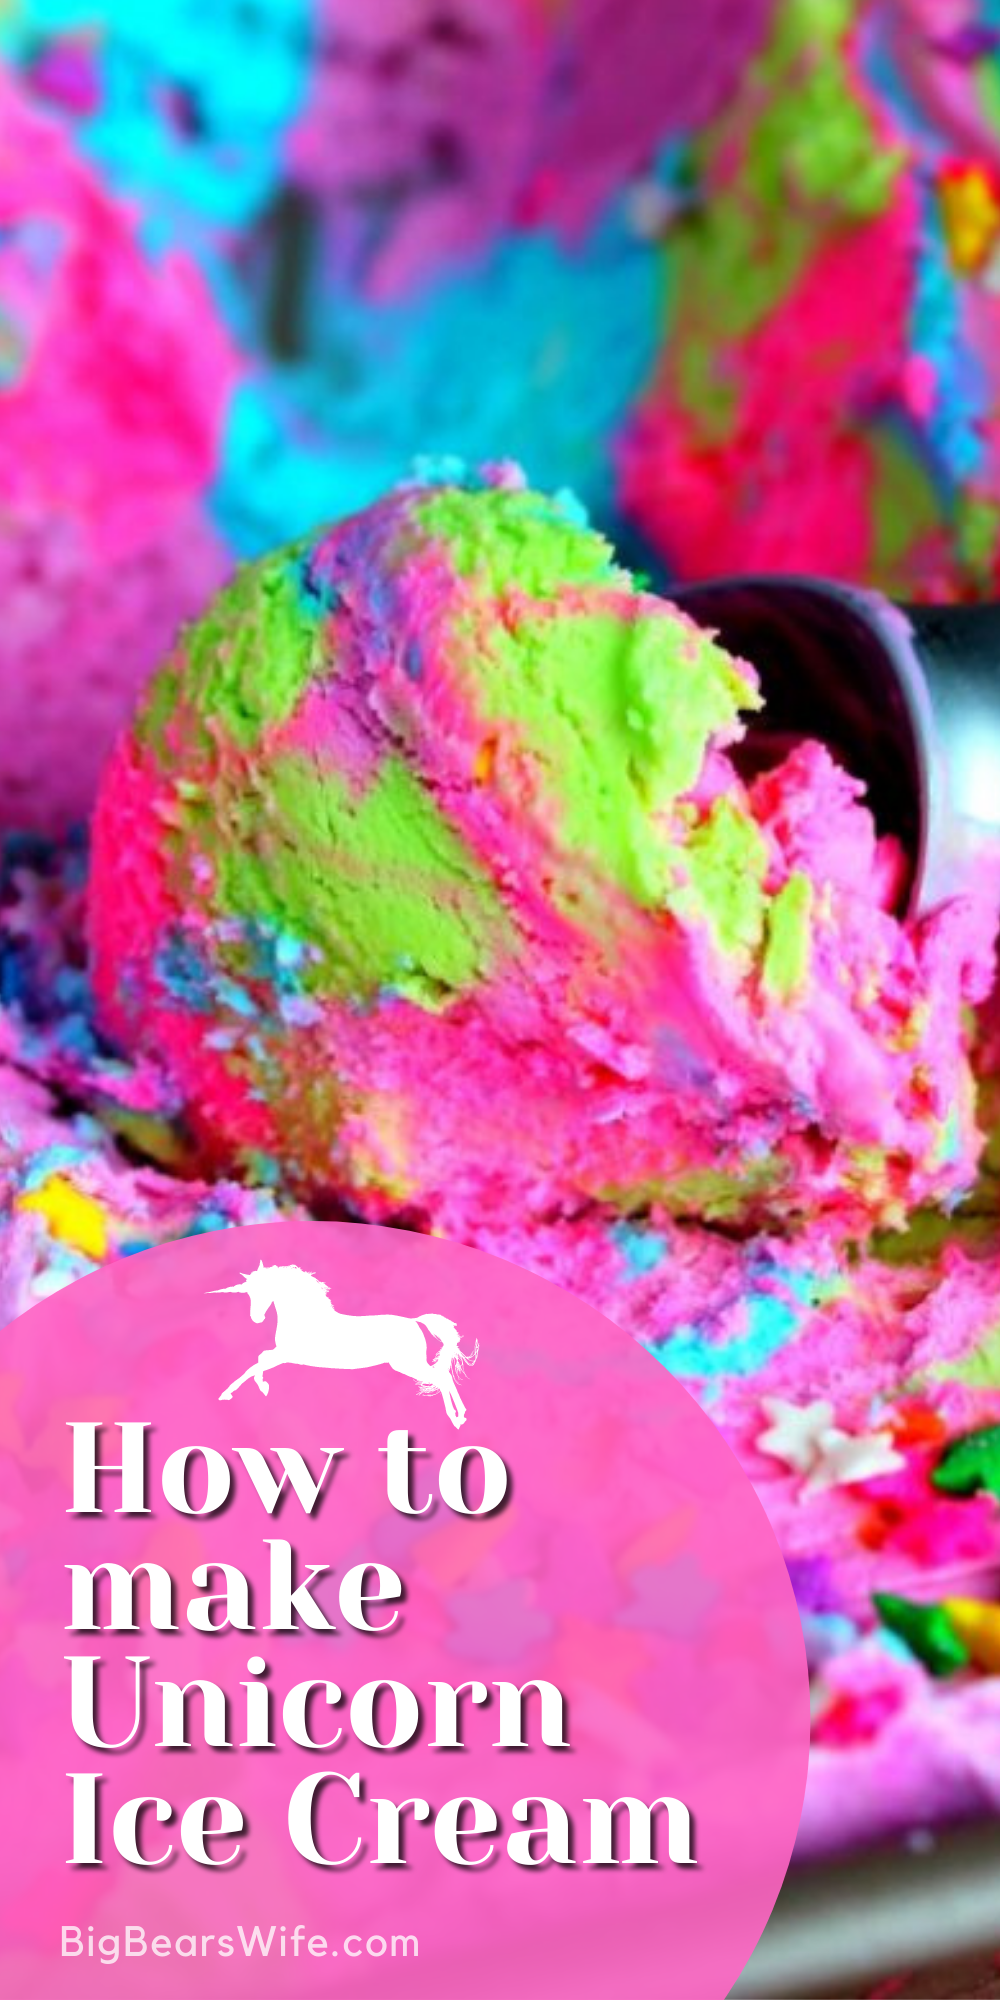 Sometimes you just need something a little wild and crazy like Unicorn Ice Cream to make you smile! Ps. this is Unicorn Ice Cream is a No Churn Ice Cream! via @bigbearswife